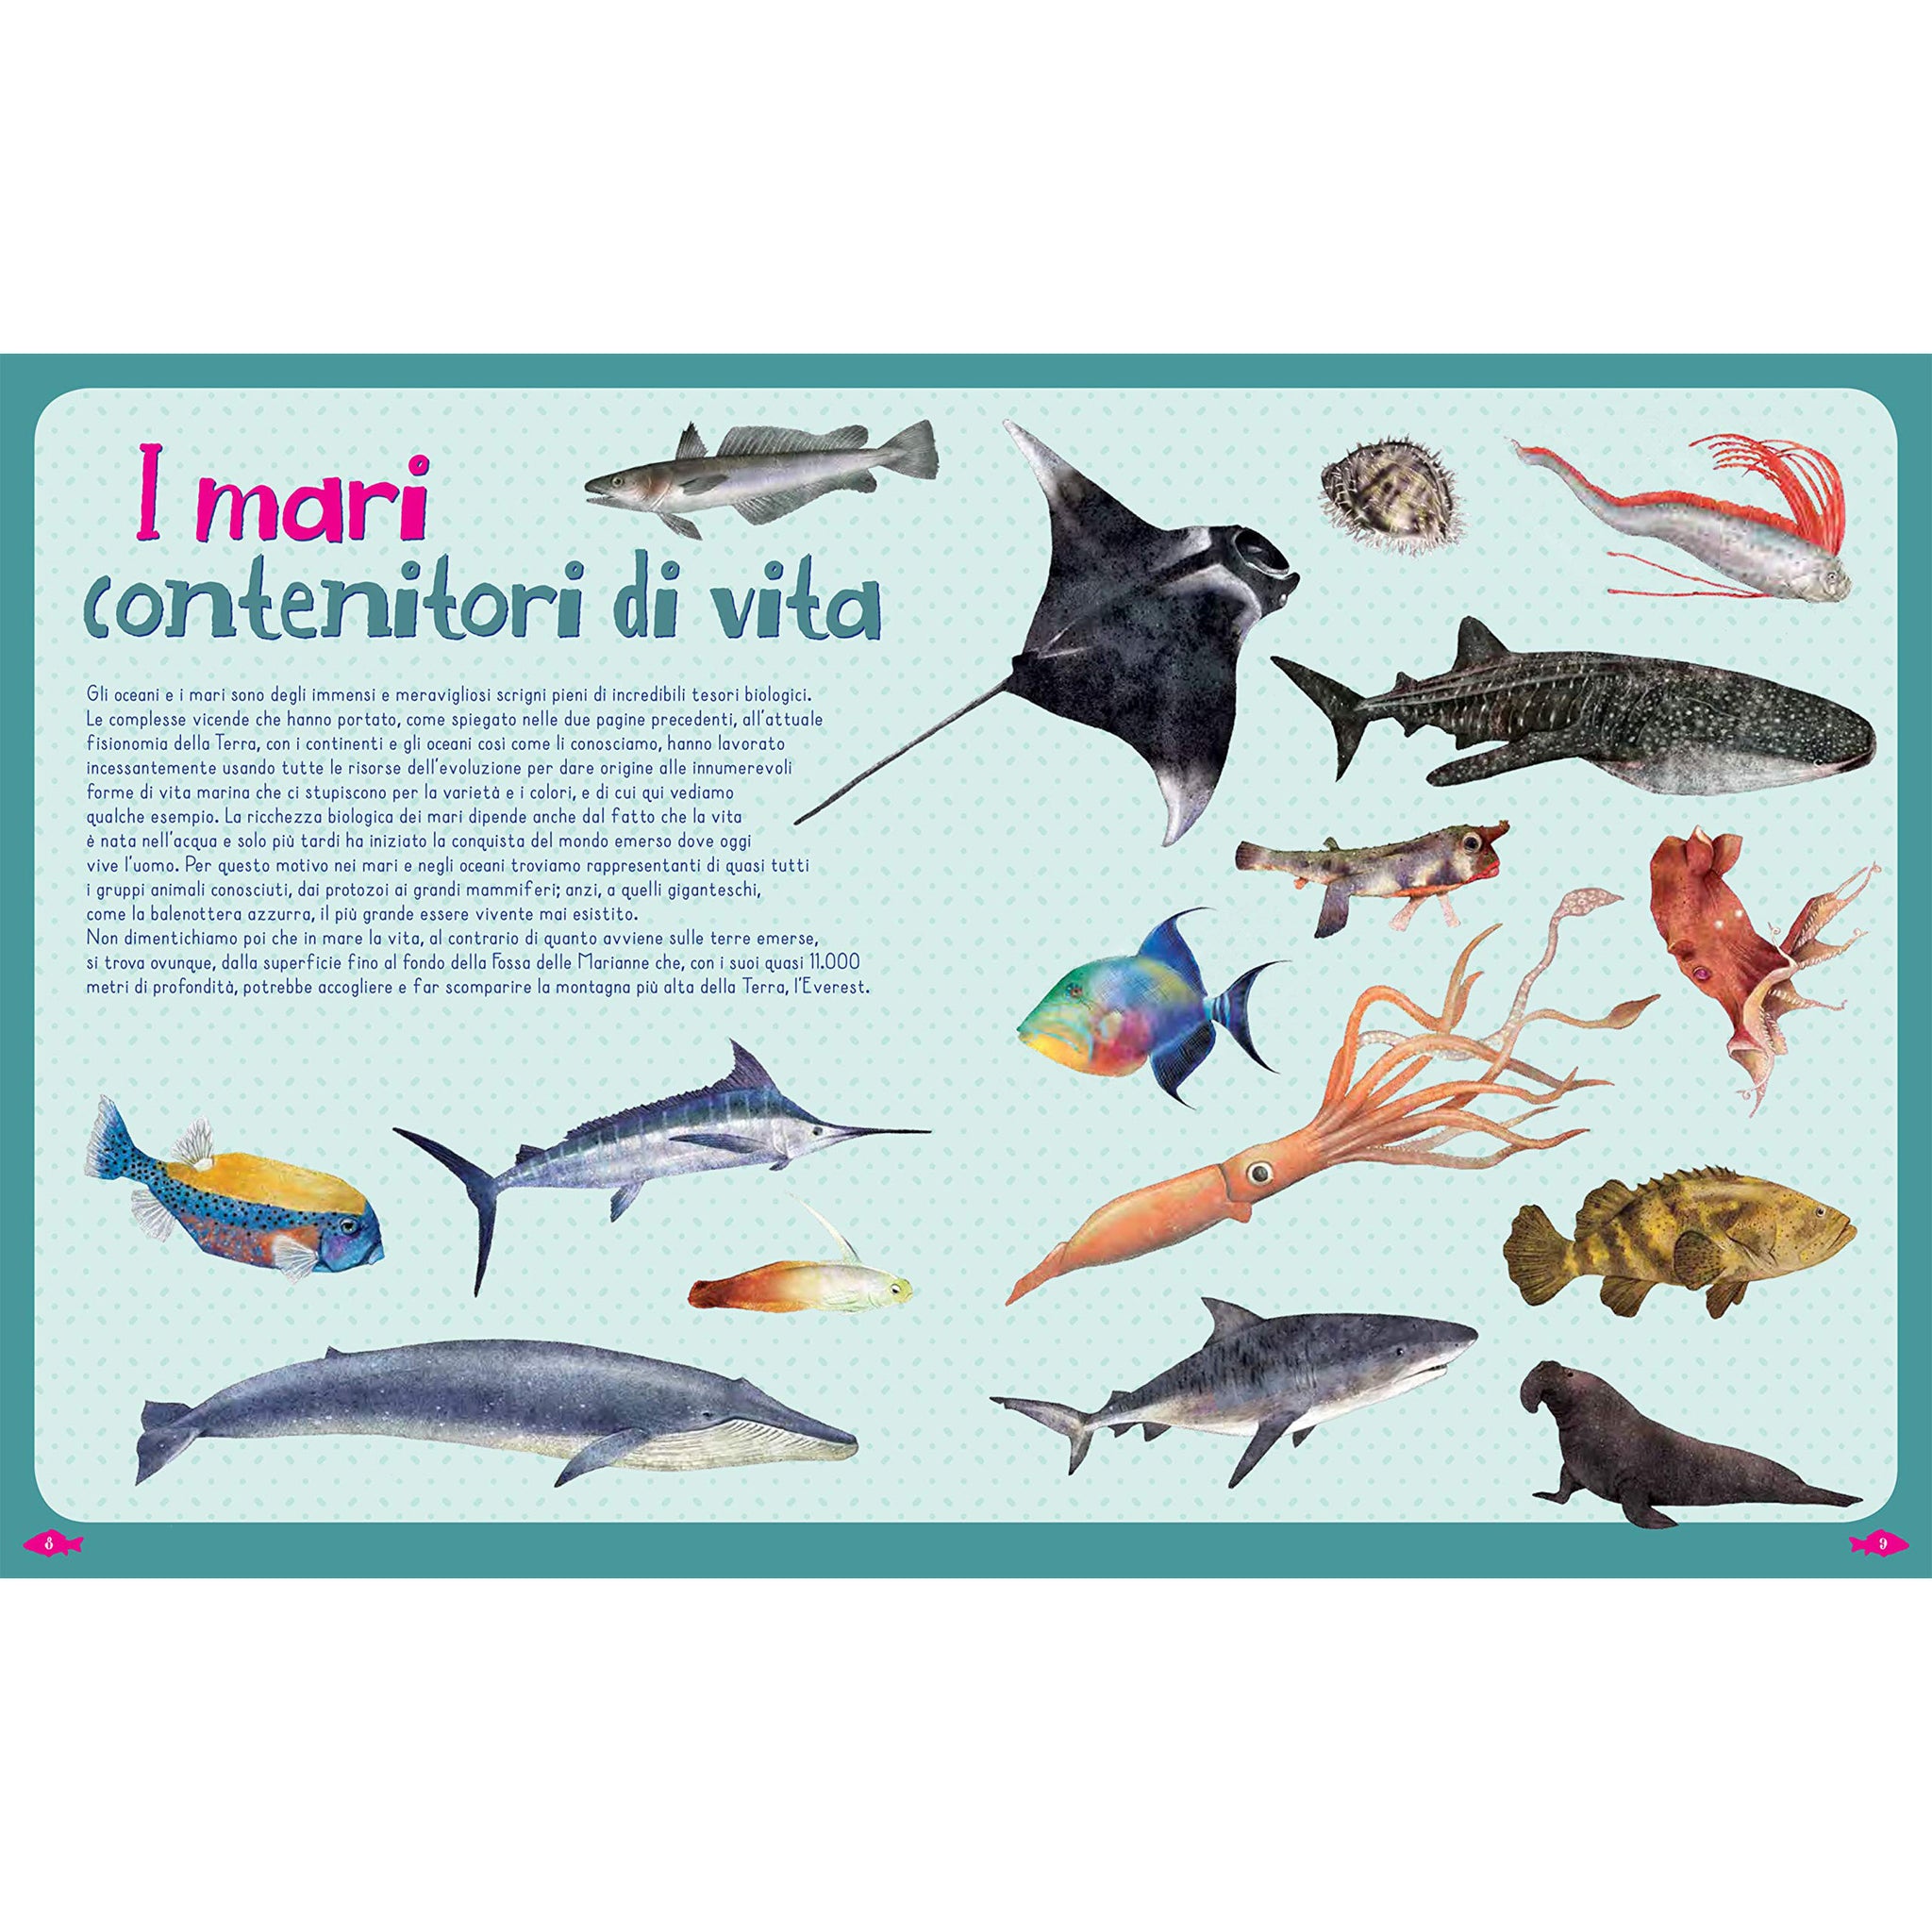 Fish of the world and other marine animals